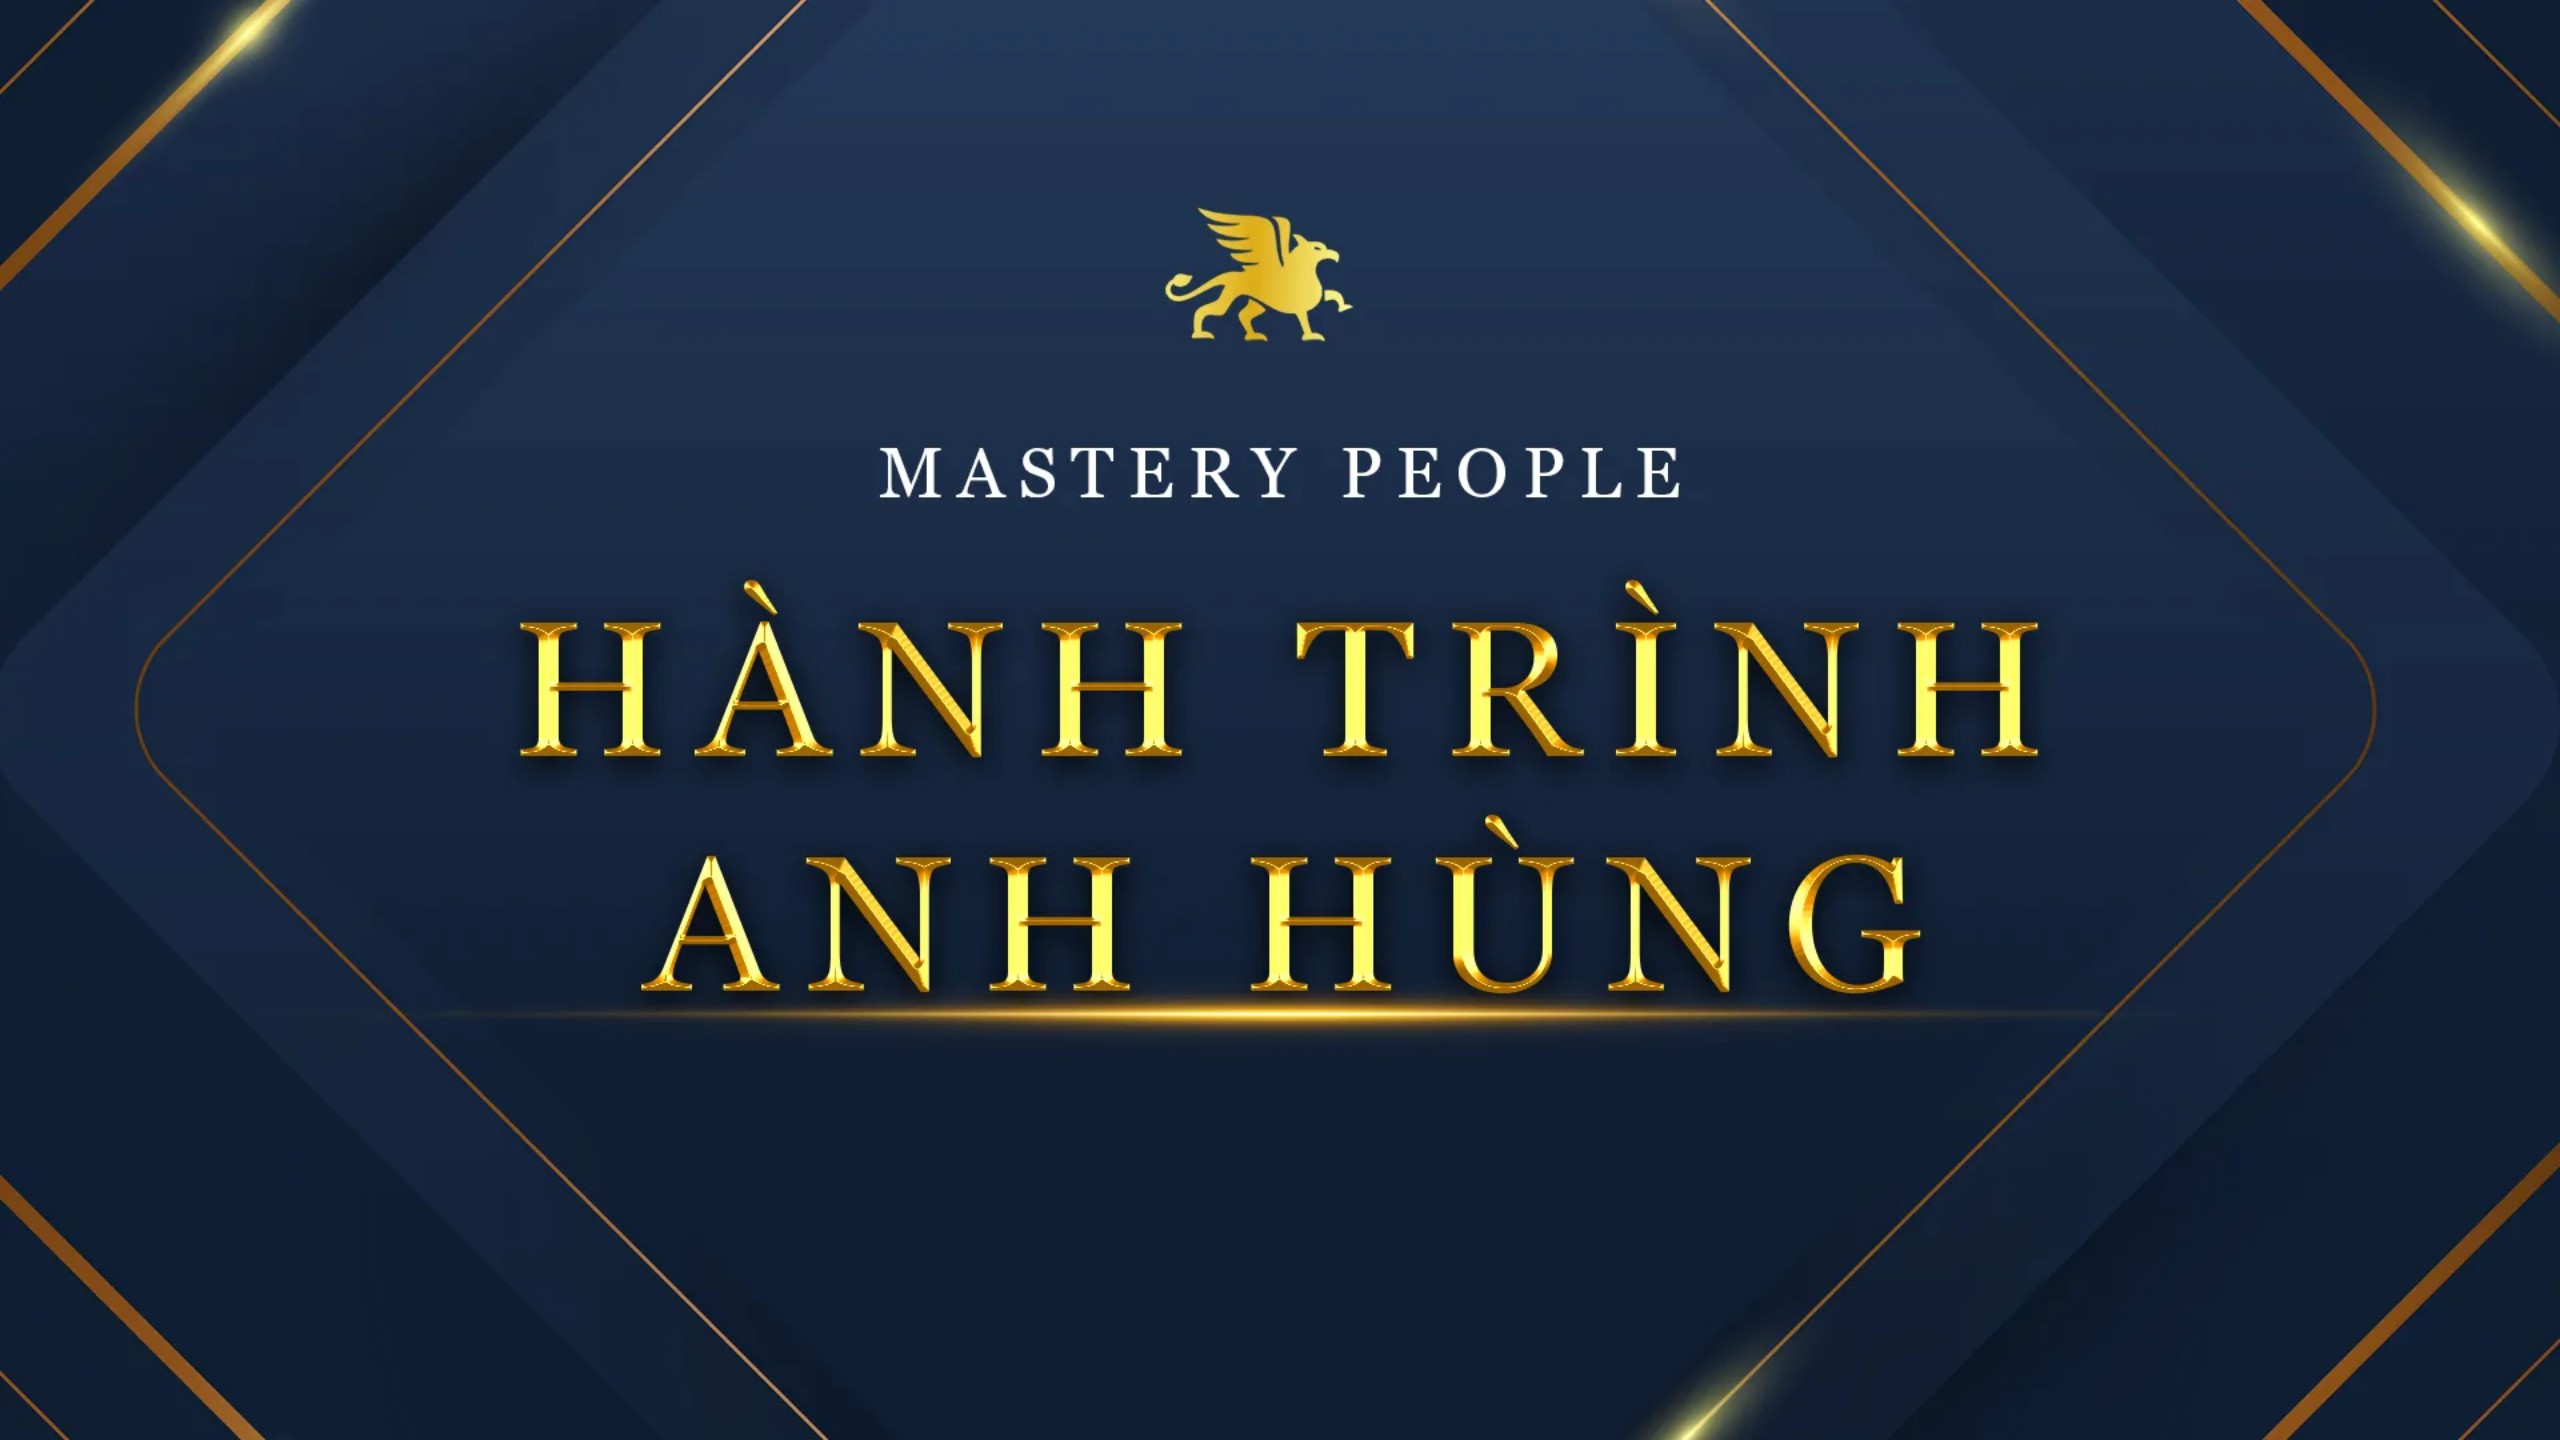 Mastery People